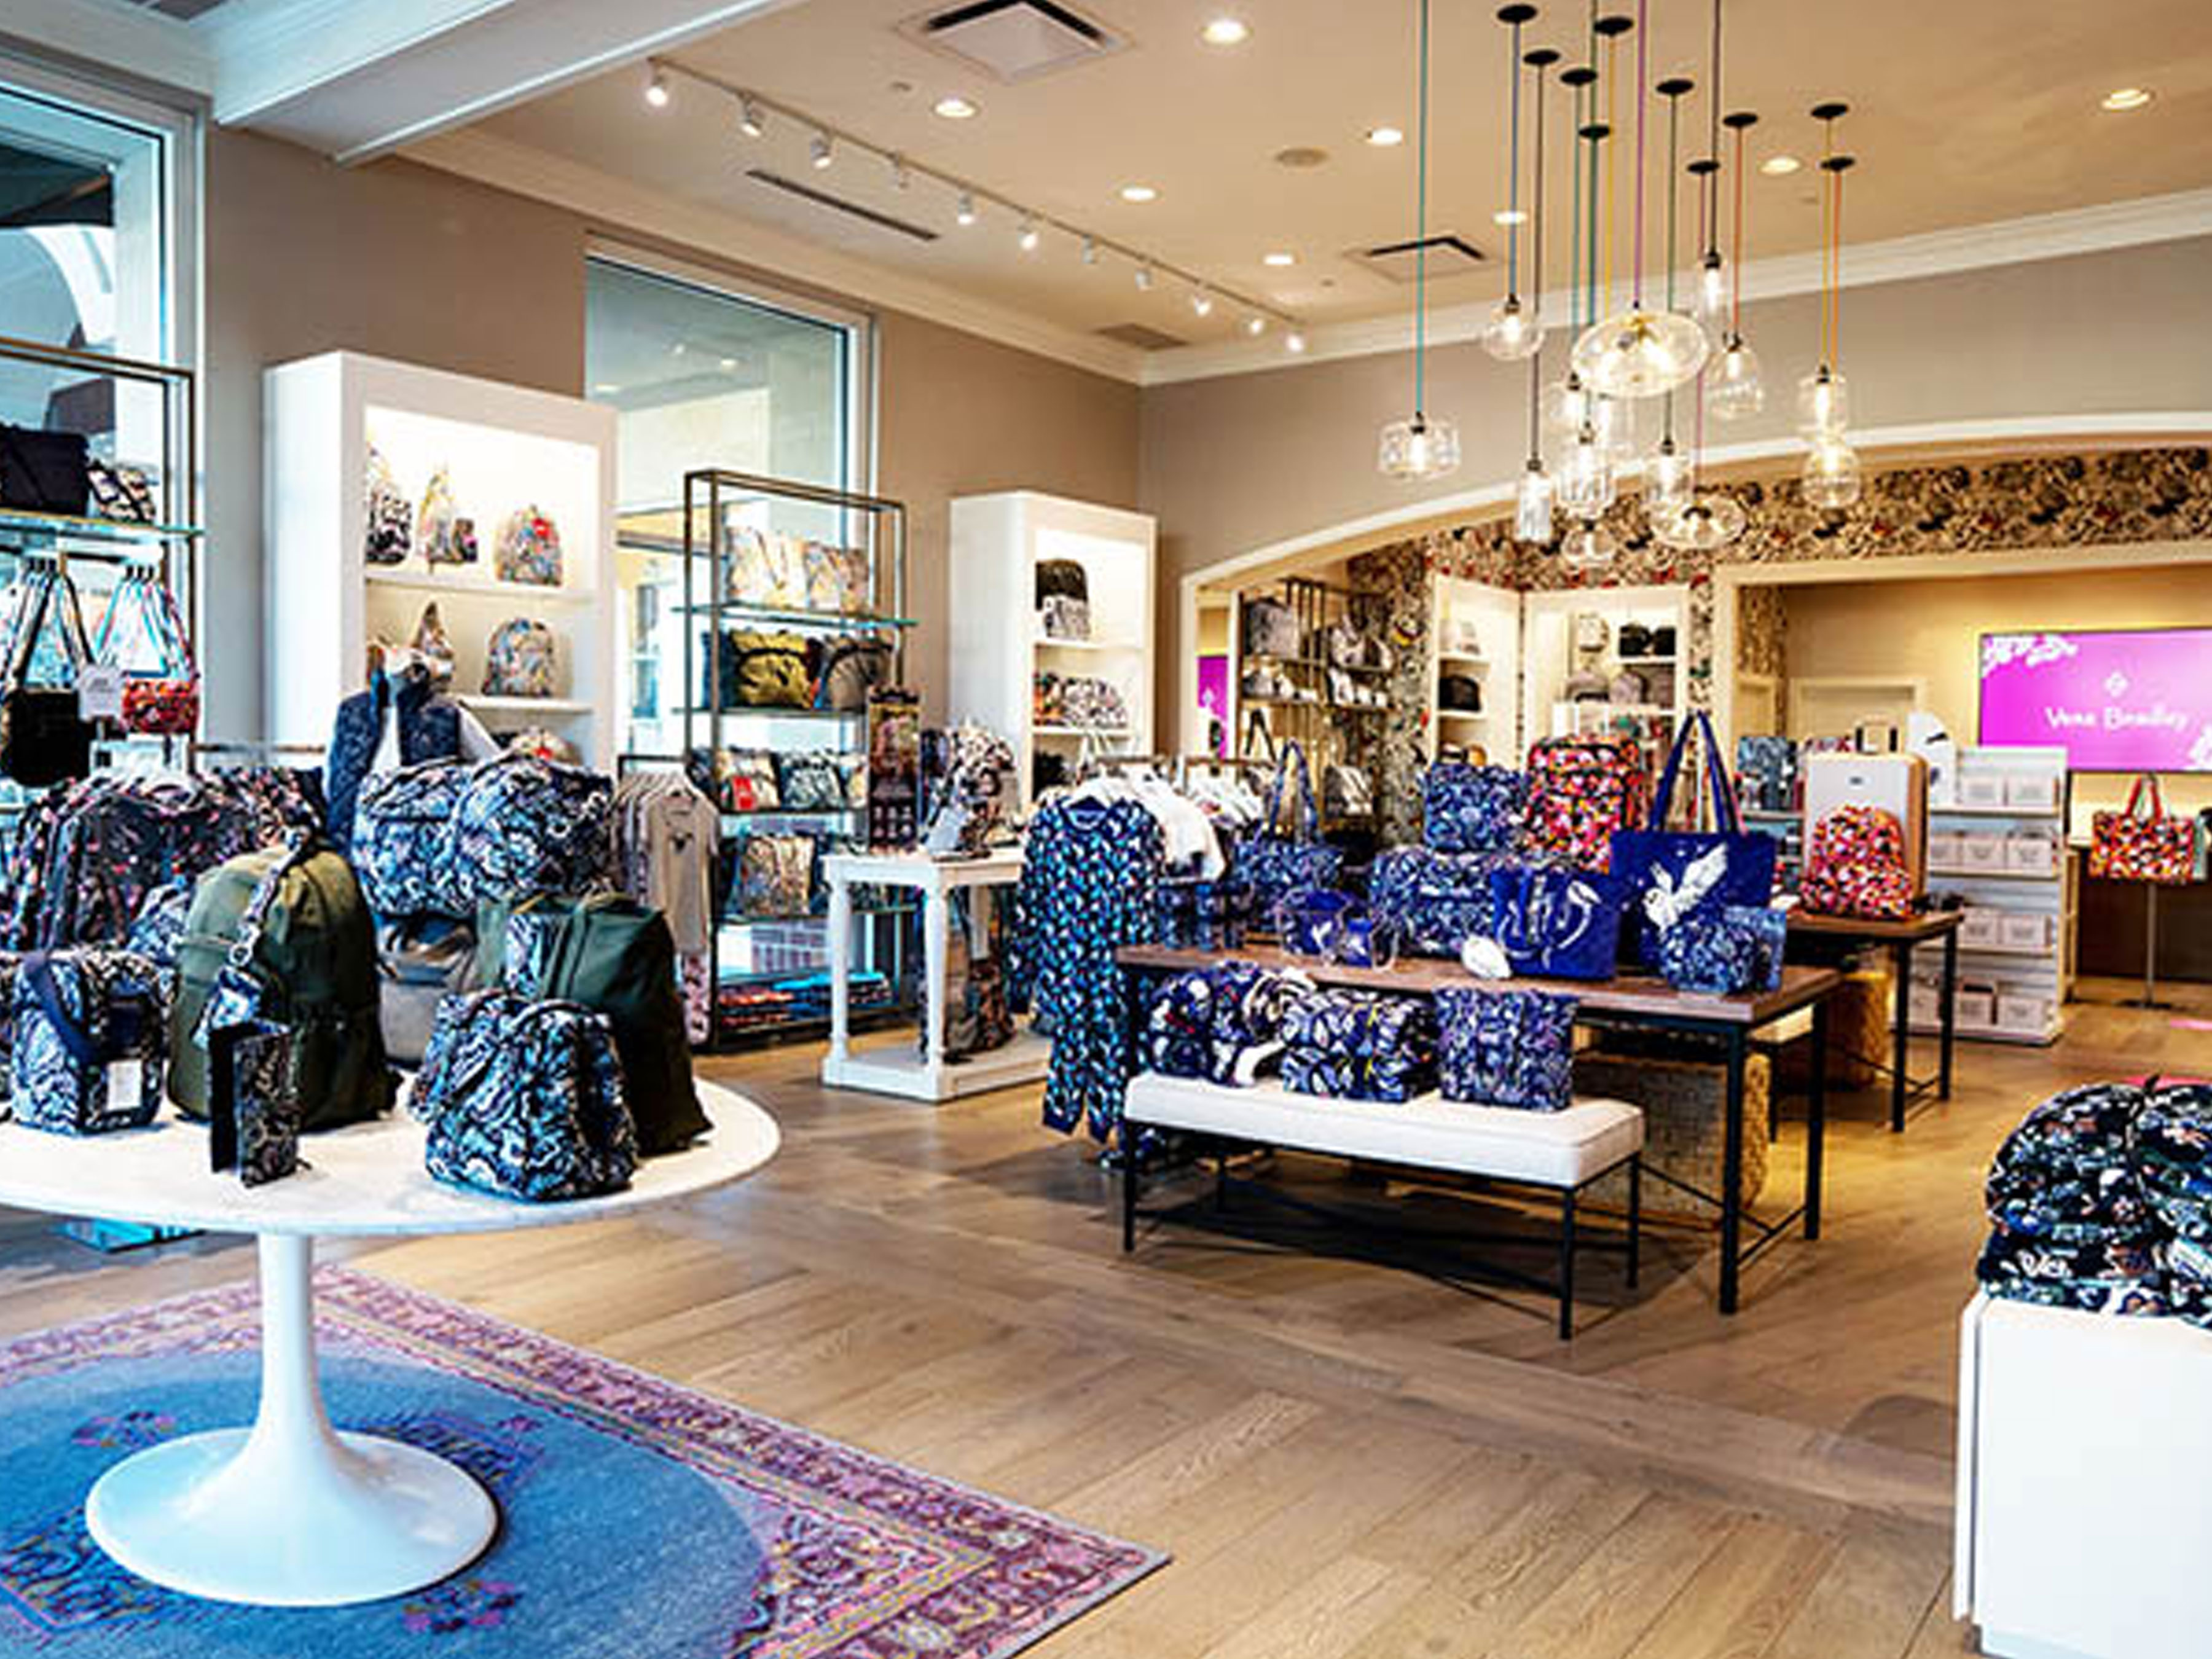 Vera Bradley and Things Remembered stores at Westfarms close